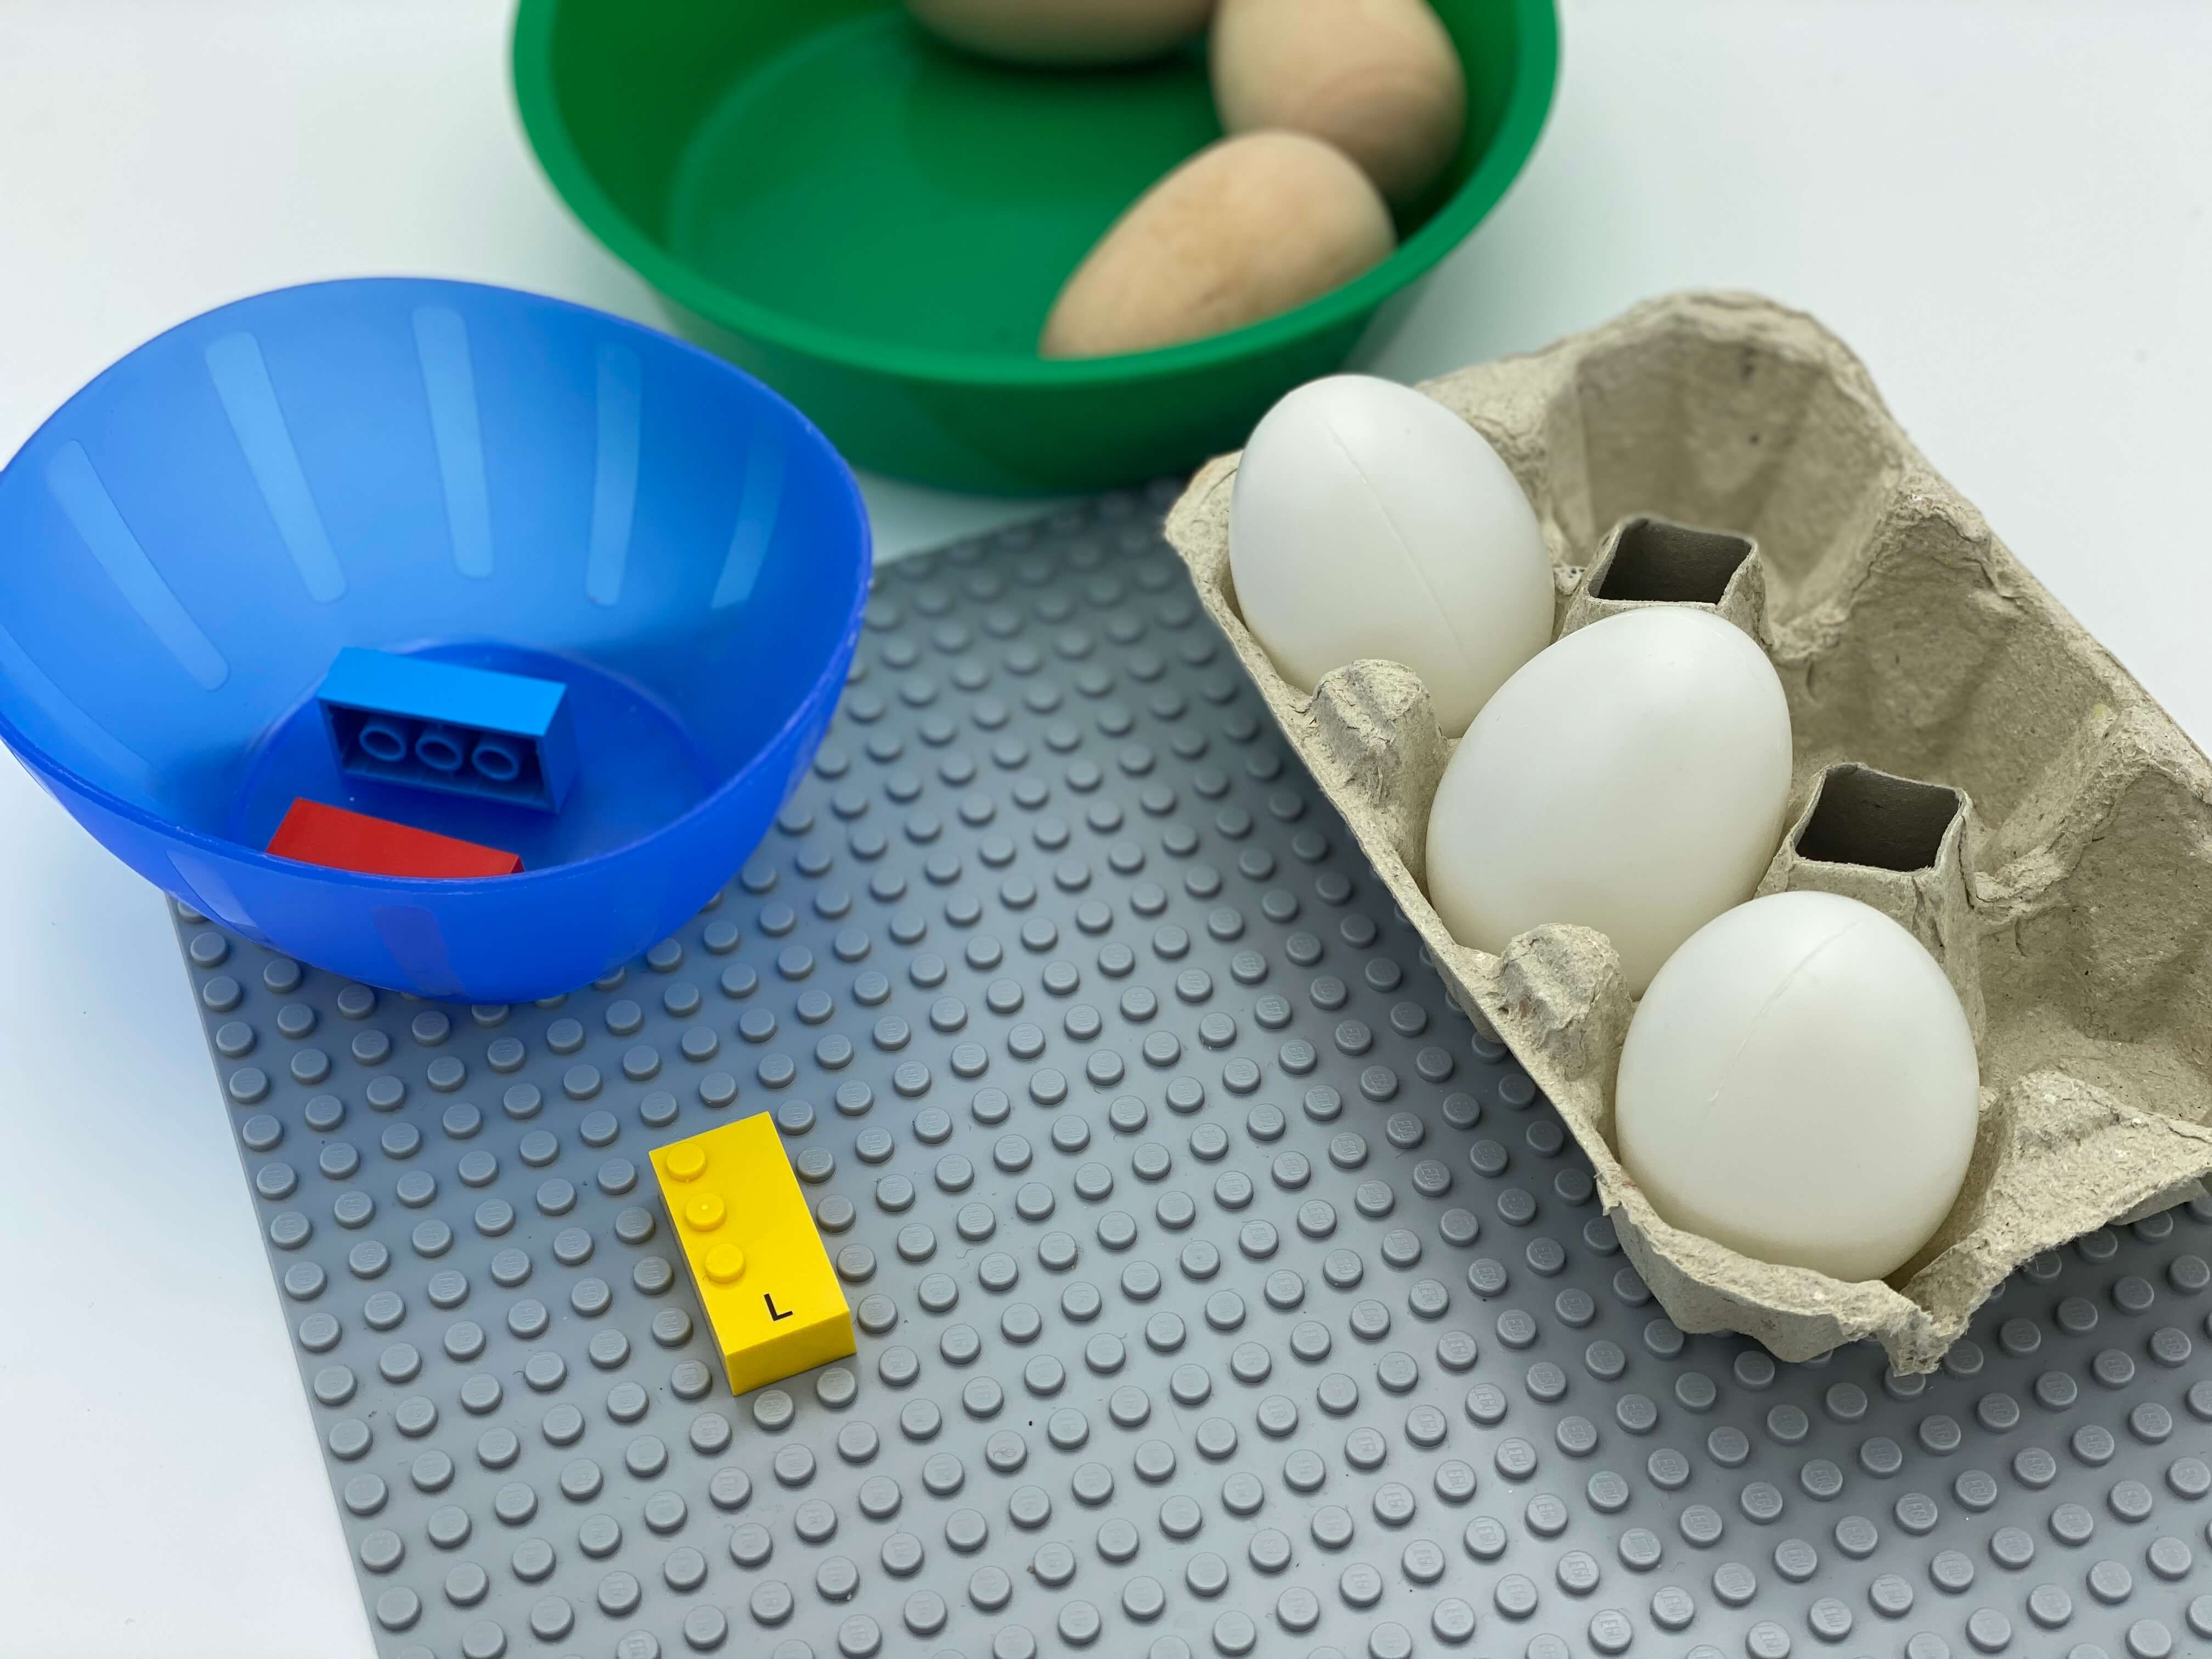 Letter brick l on the base plate, a bowl with bricks, a bowl with eggs, an egg carton with 3 eggs split in dot 1, dot 2 and dot 3.